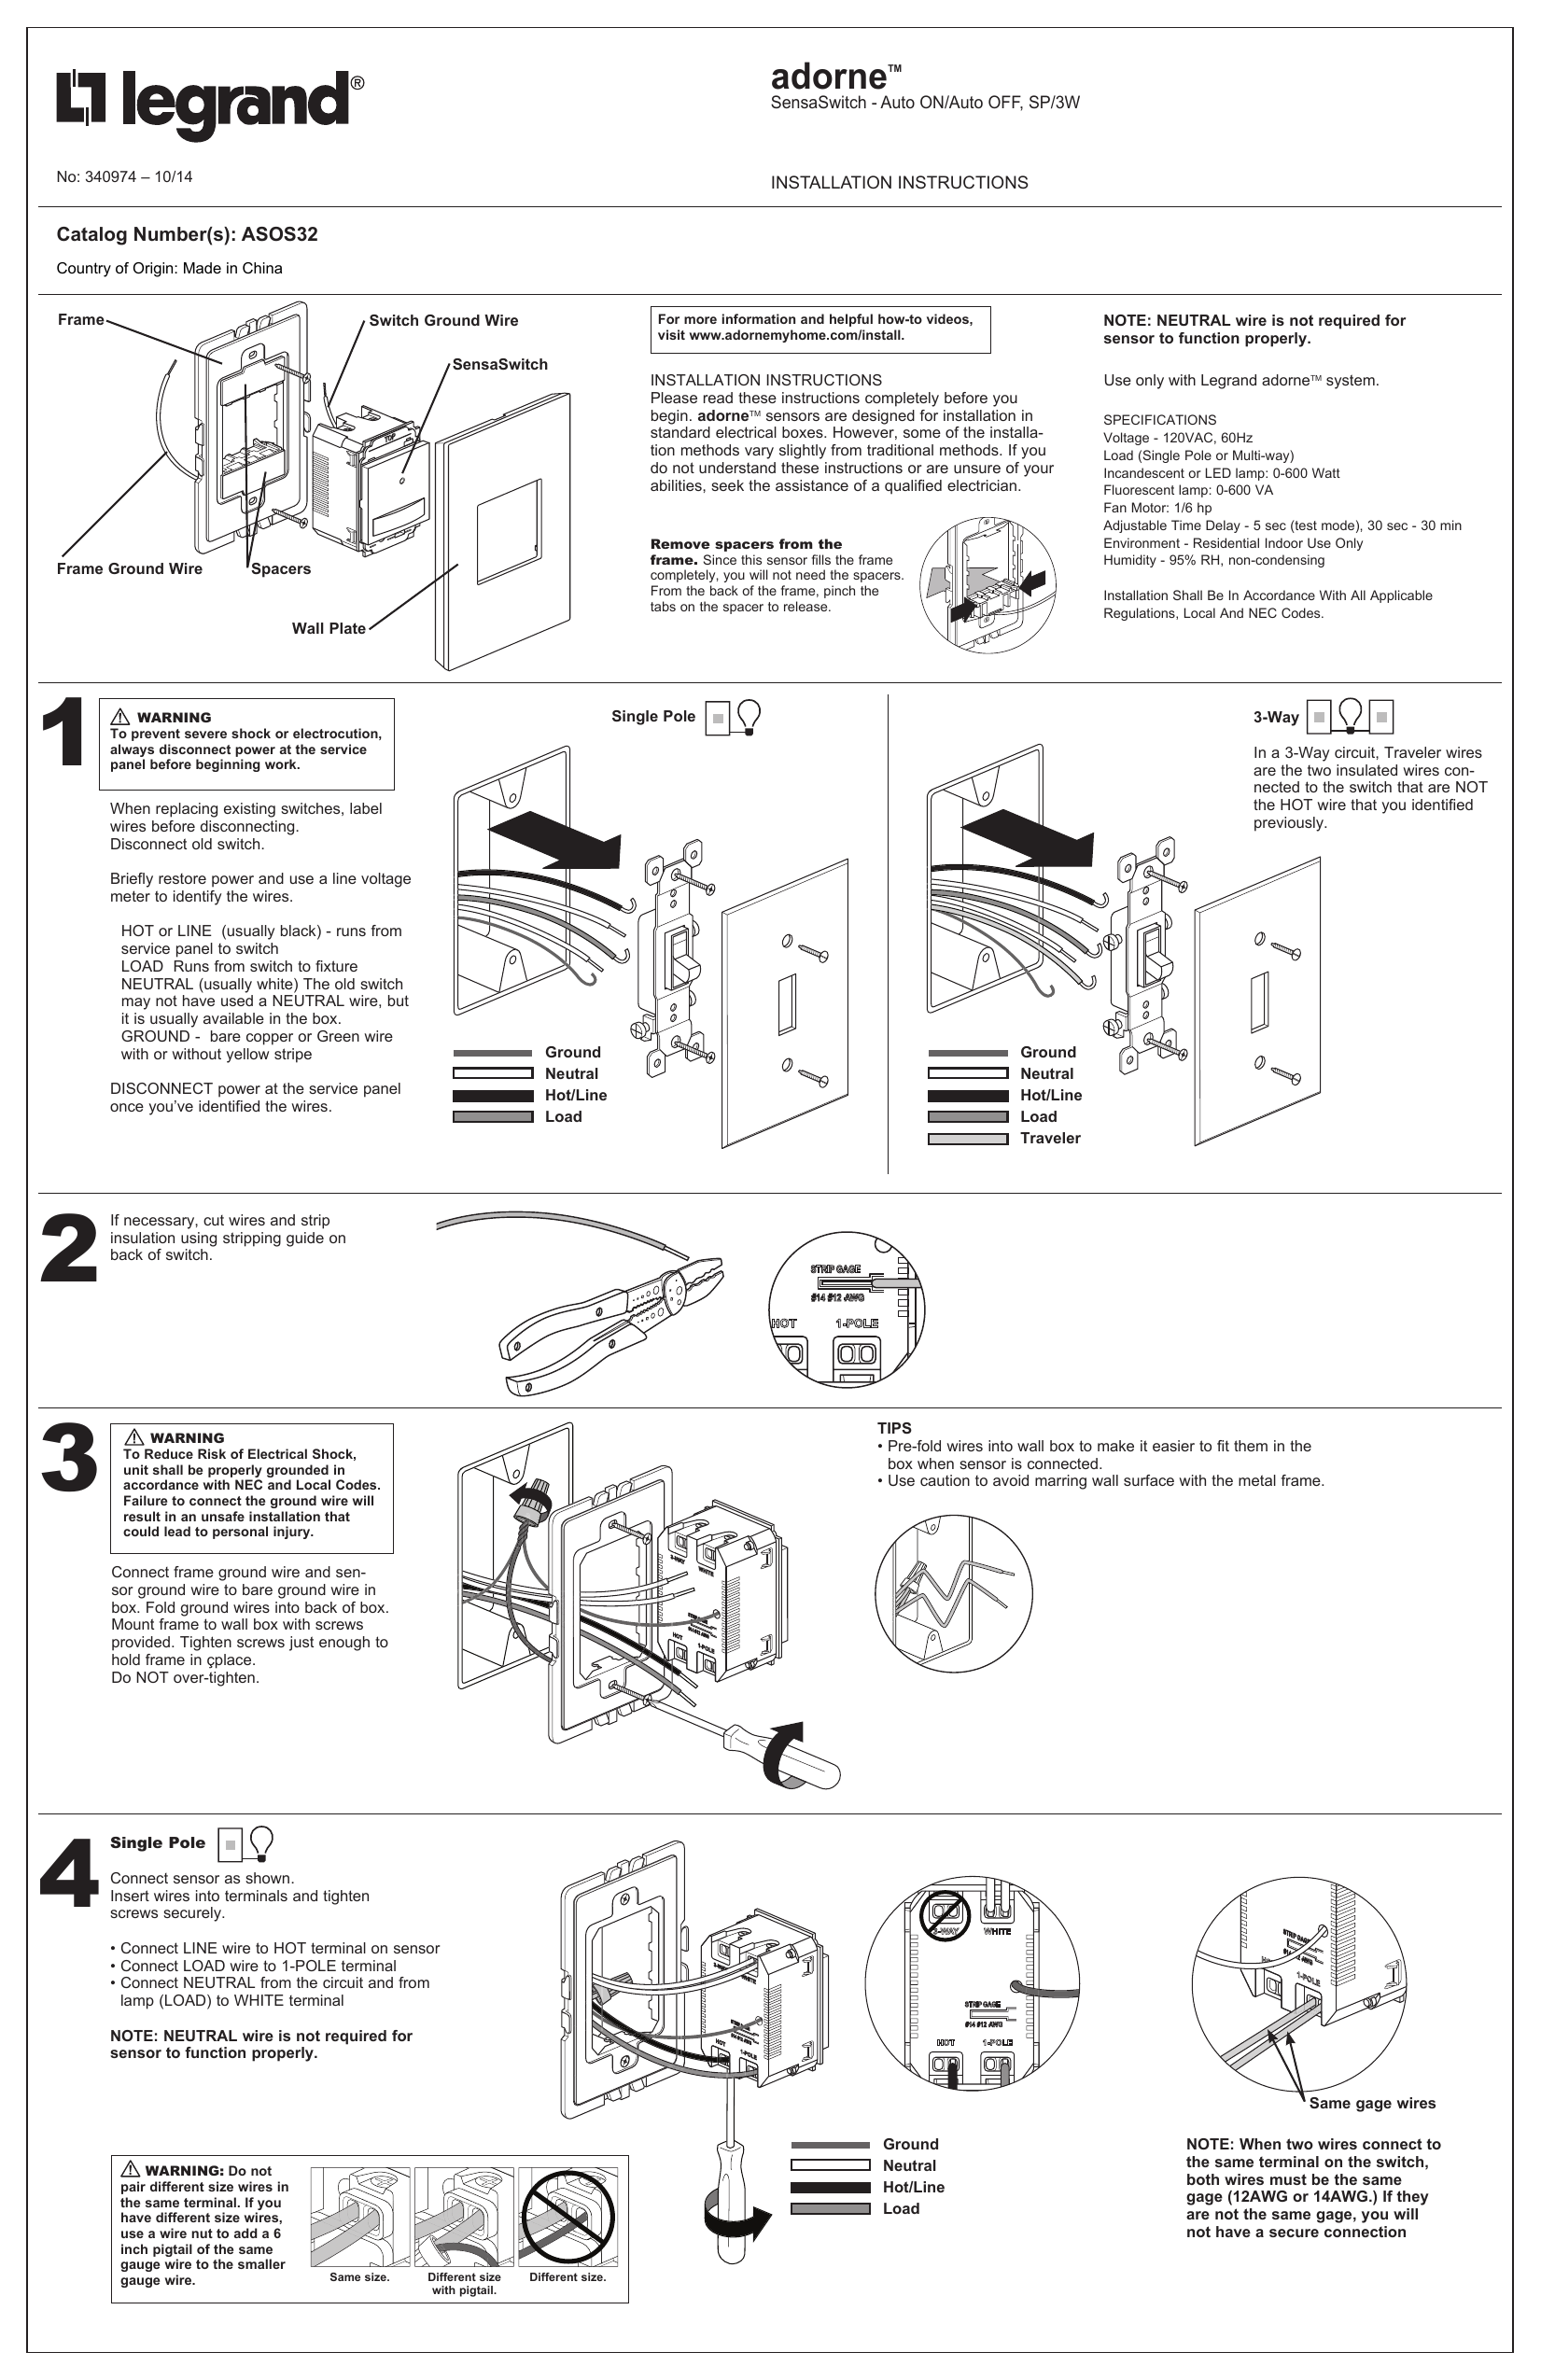 Legrand 4 Way Paddle Switch Wiring Diagram - DiagramSketch